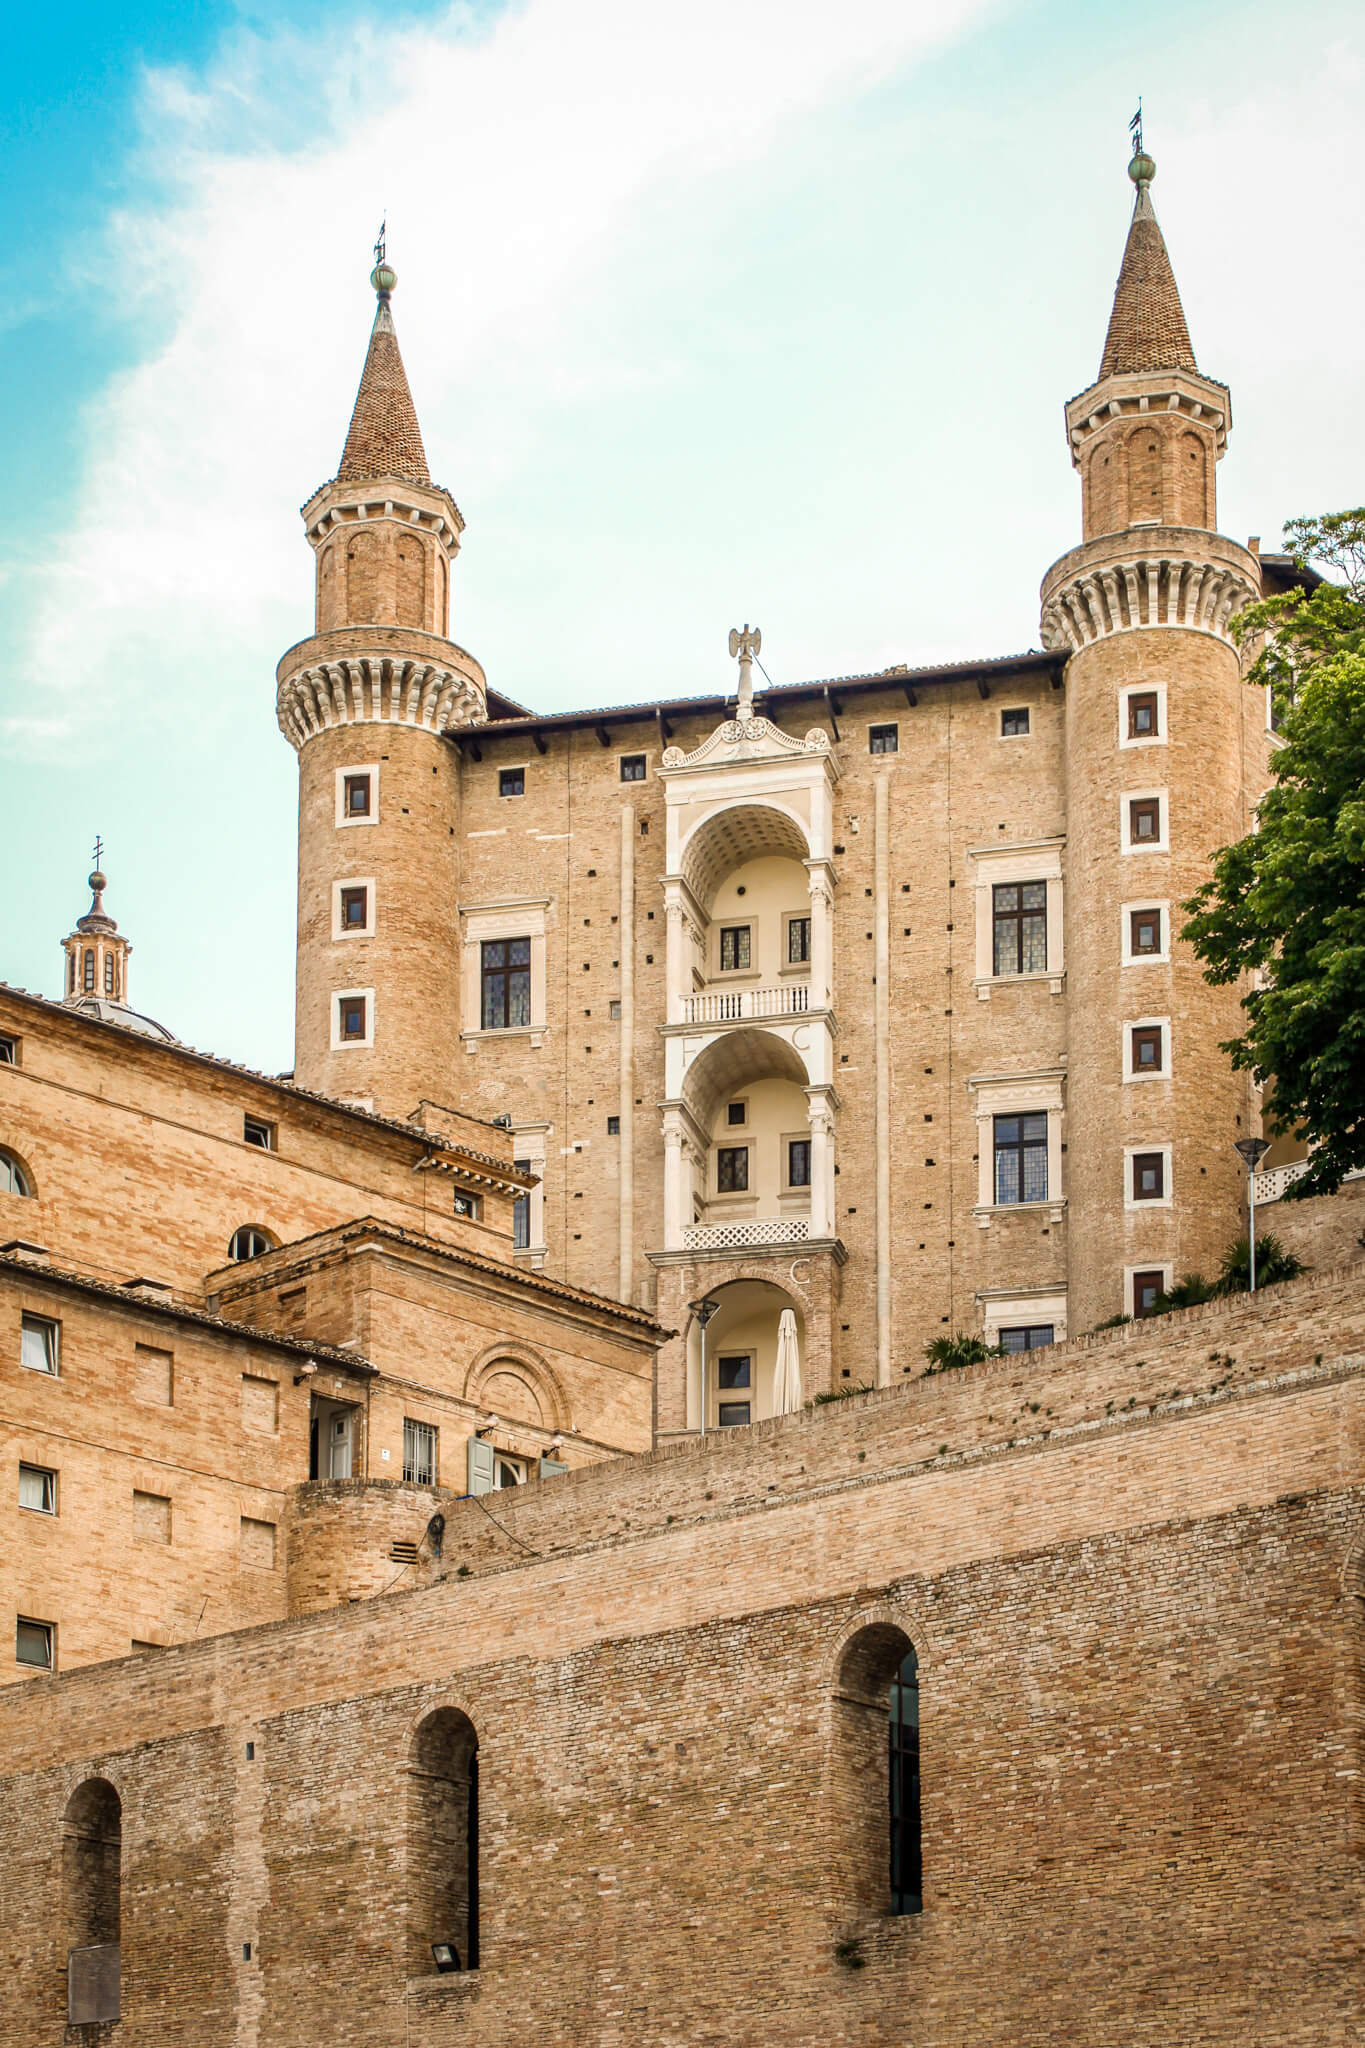 The Palazzo Ducale in Urbino, Italy